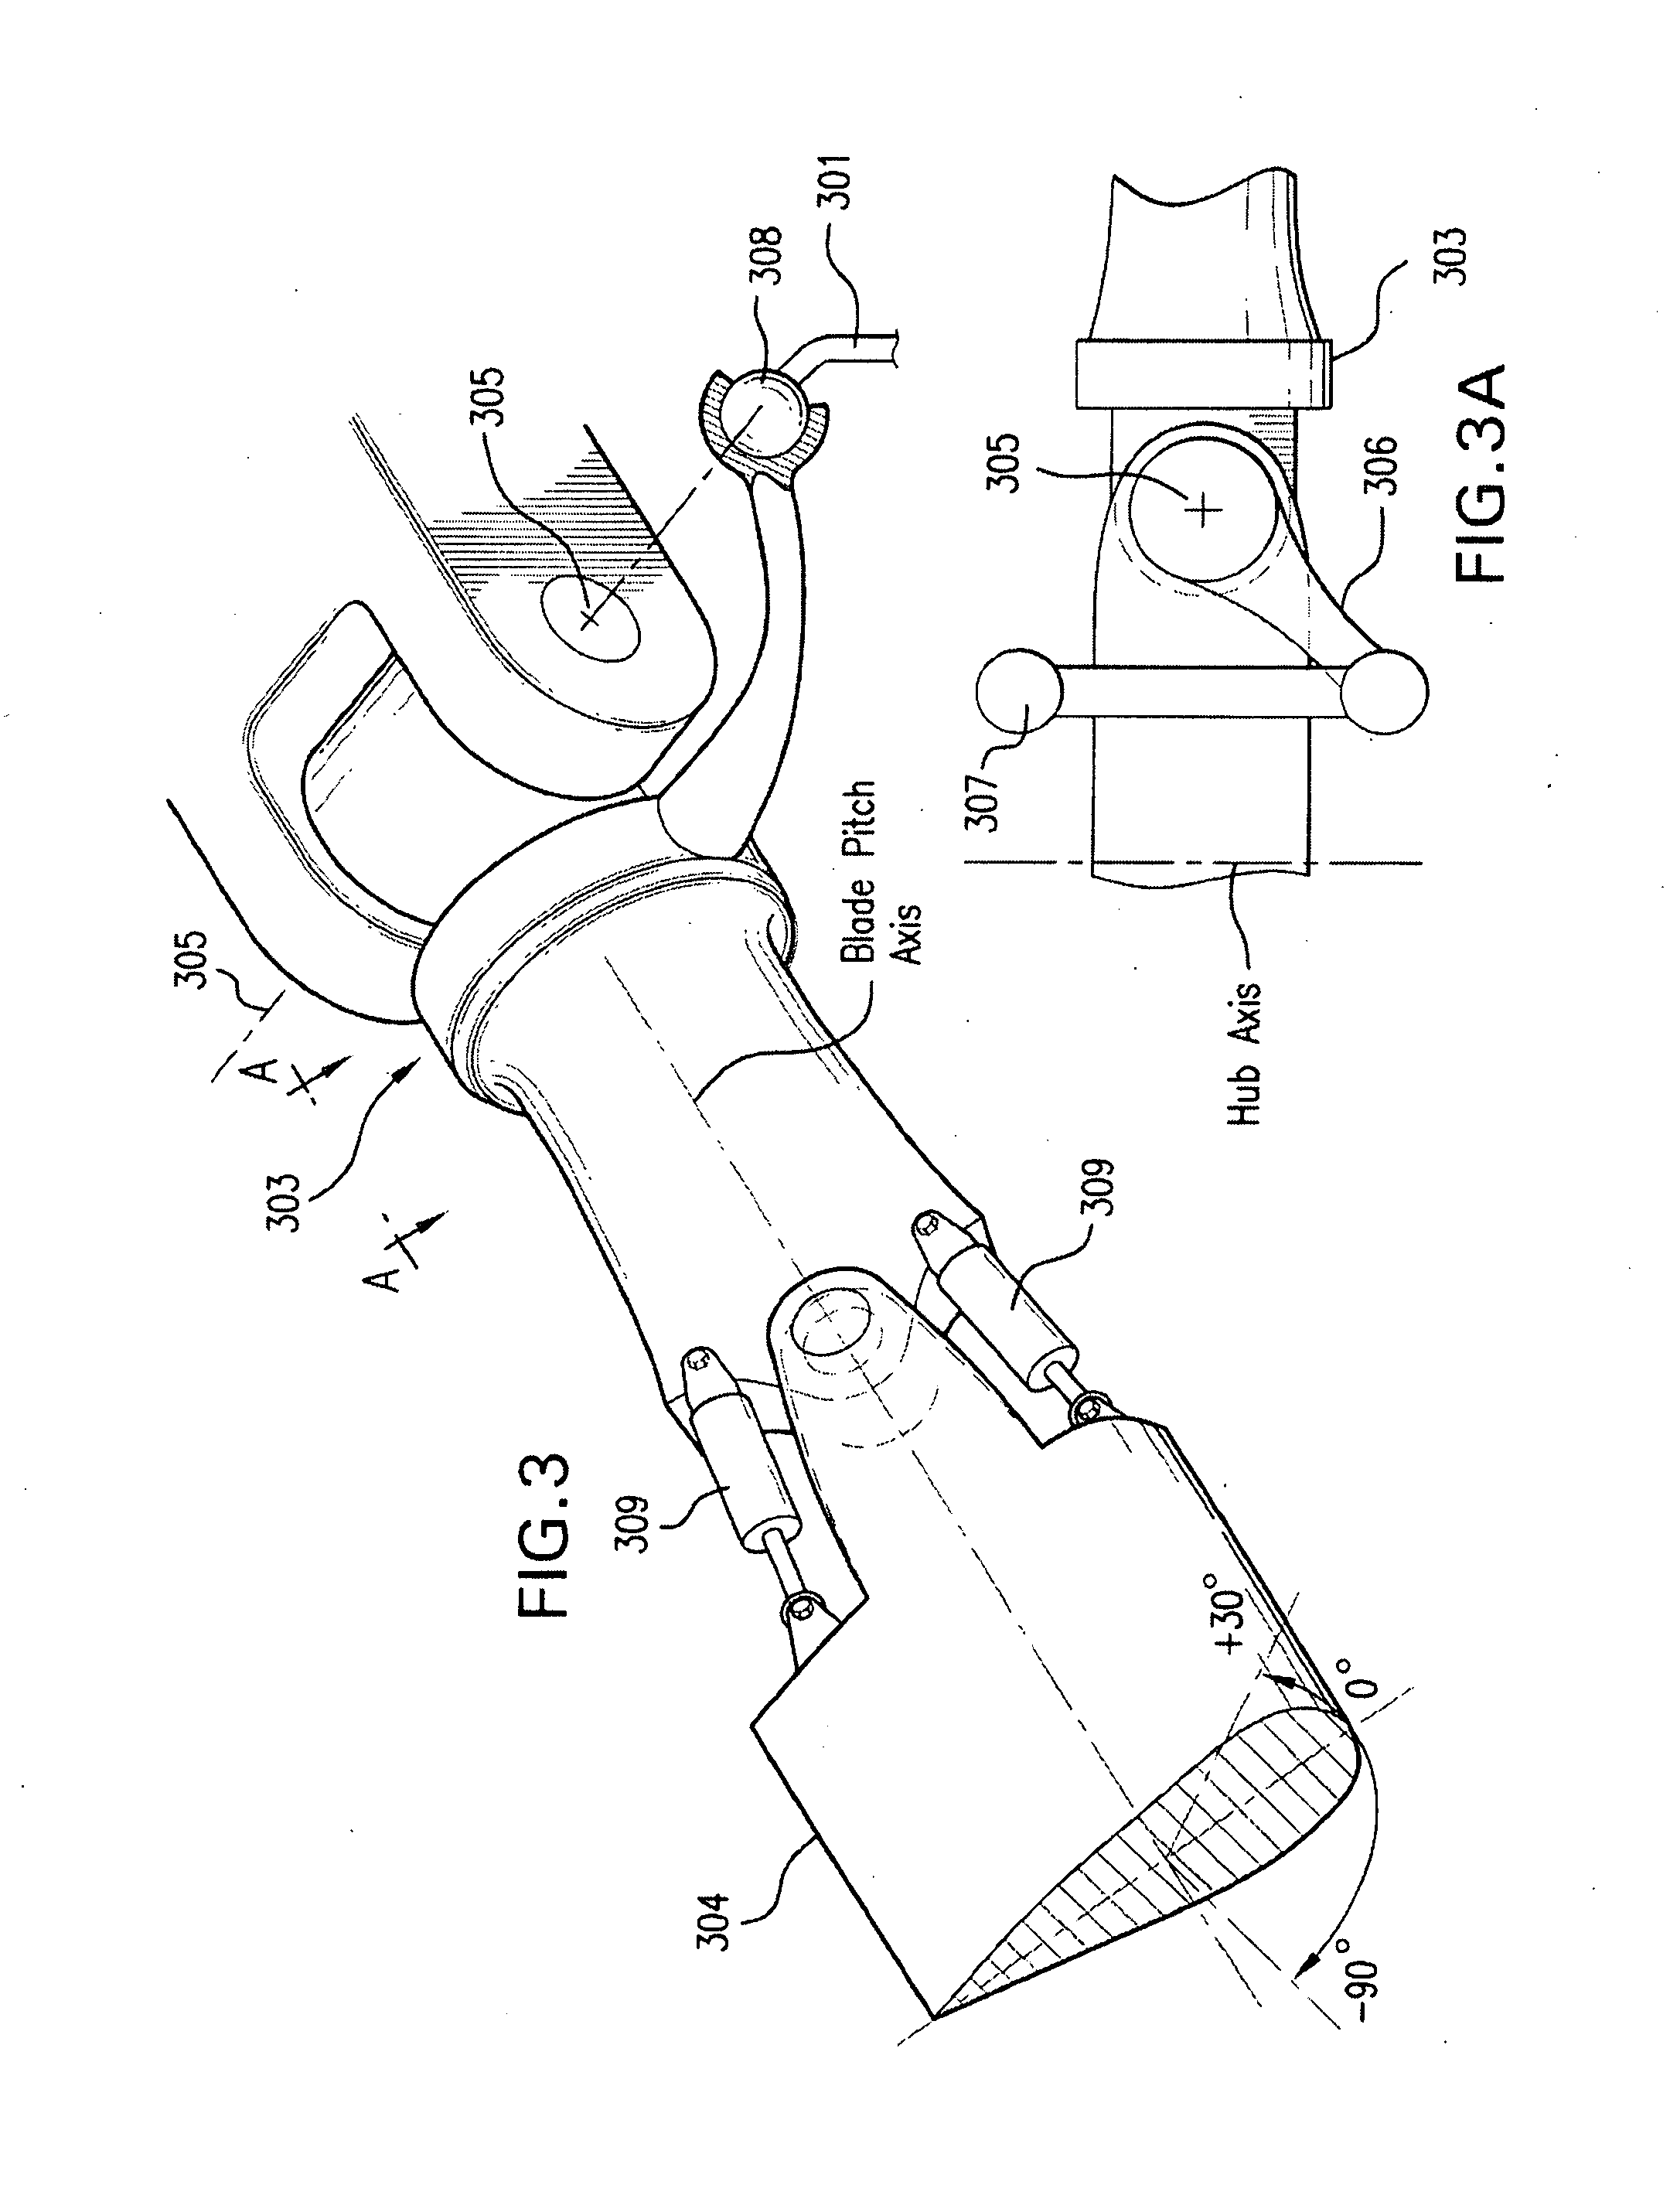 Forward (Upstream) Folding Rotor for a Vertical or Short Take-Off and Landing (V/STOL) Aircraft